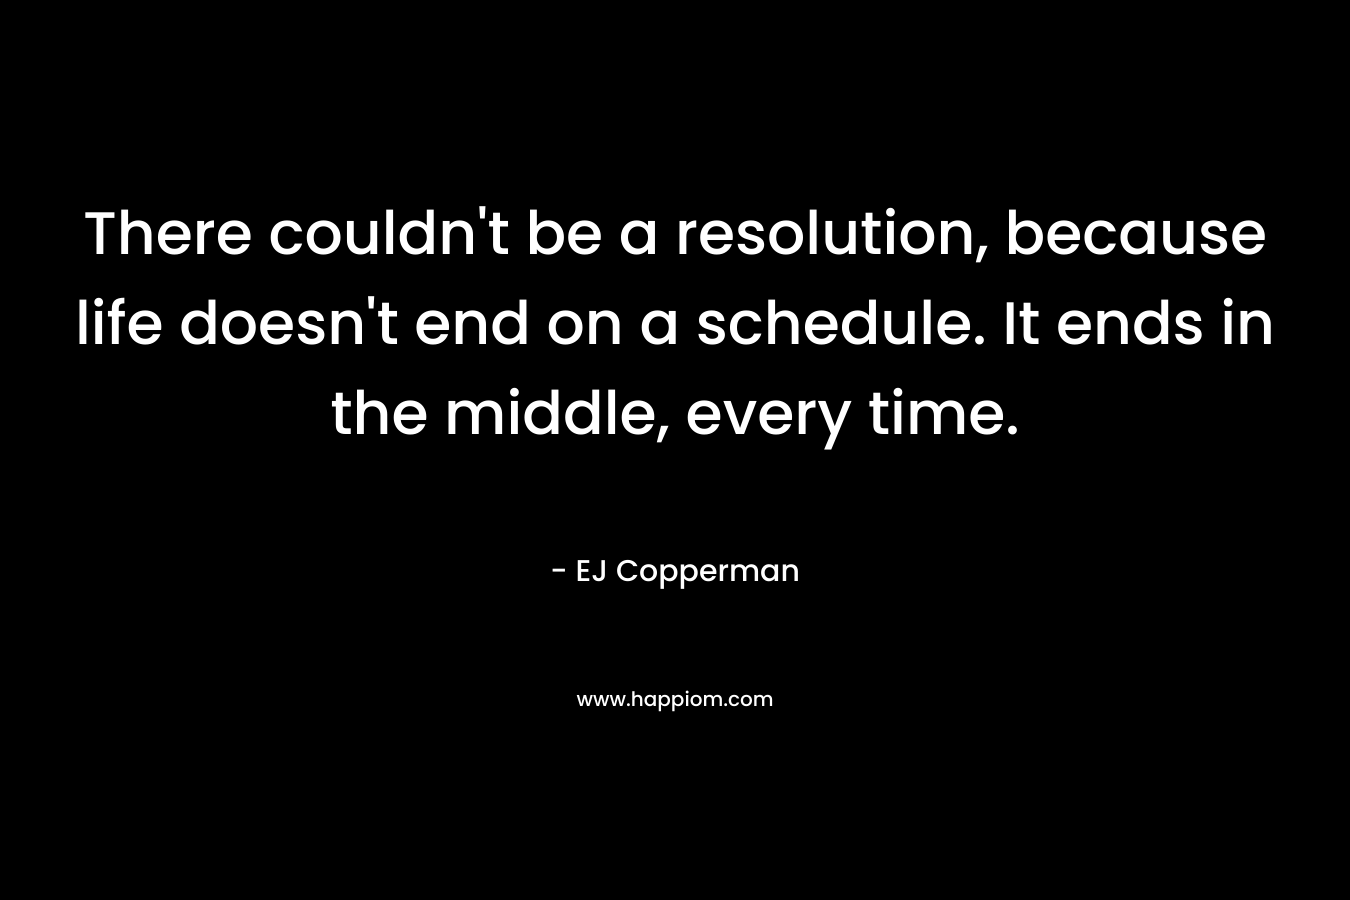 There couldn’t be a resolution, because life doesn’t end on a schedule. It ends in the middle, every time. – EJ Copperman